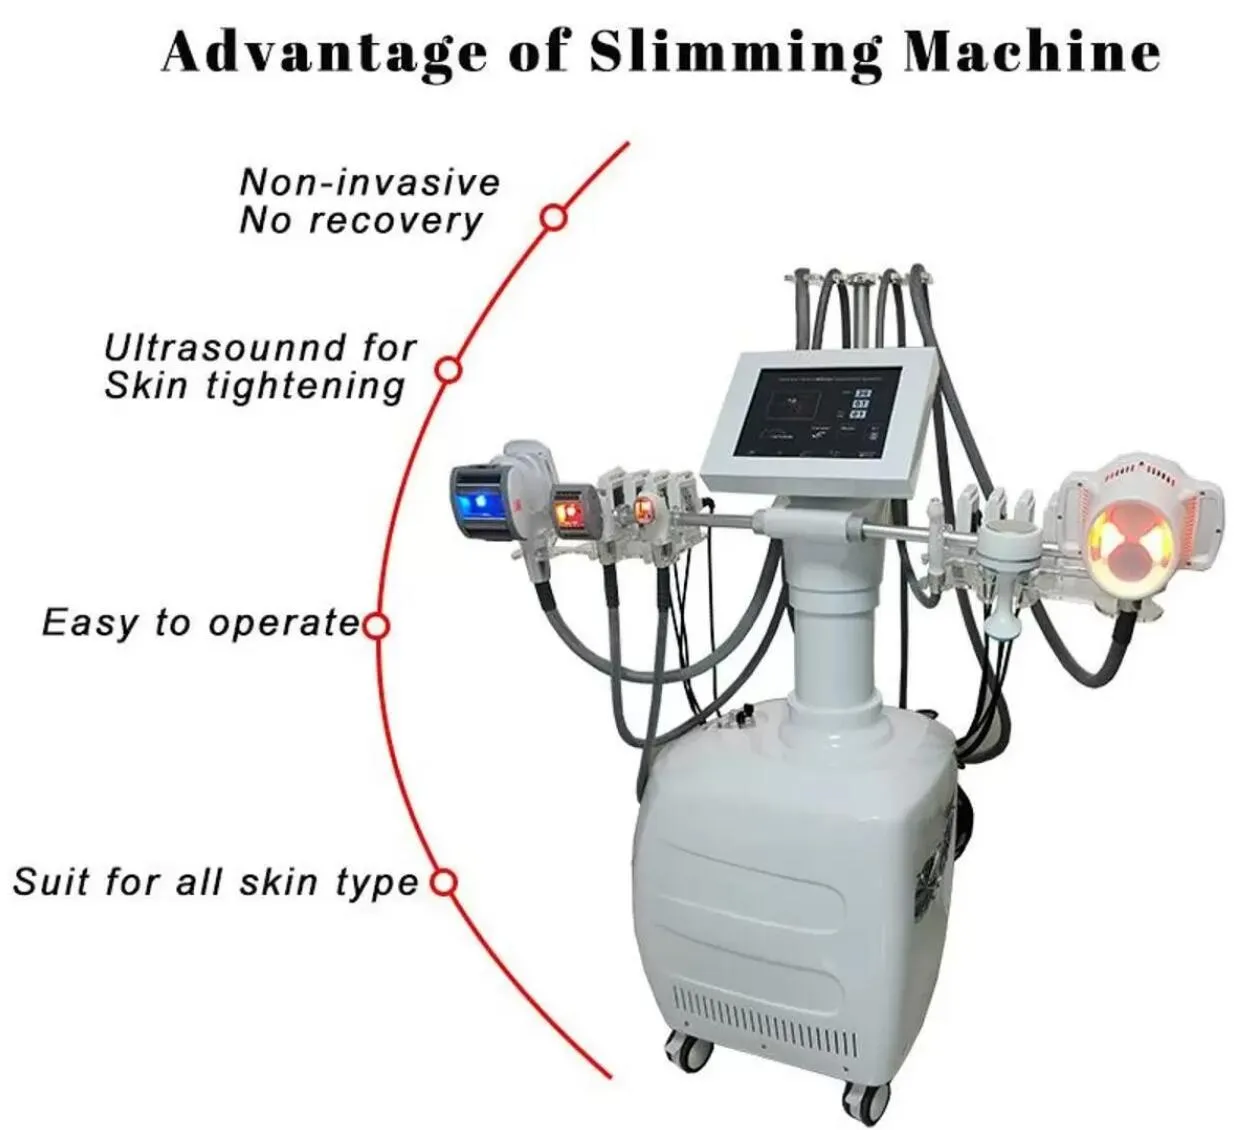 New arrival Ultrasonic Lipo Lase Diode Buttock Slimming Machine Fat Removal Vela Body Shaping Equipment Weight Loss 40k Cavitation Arm Leg Cellulite Reduction